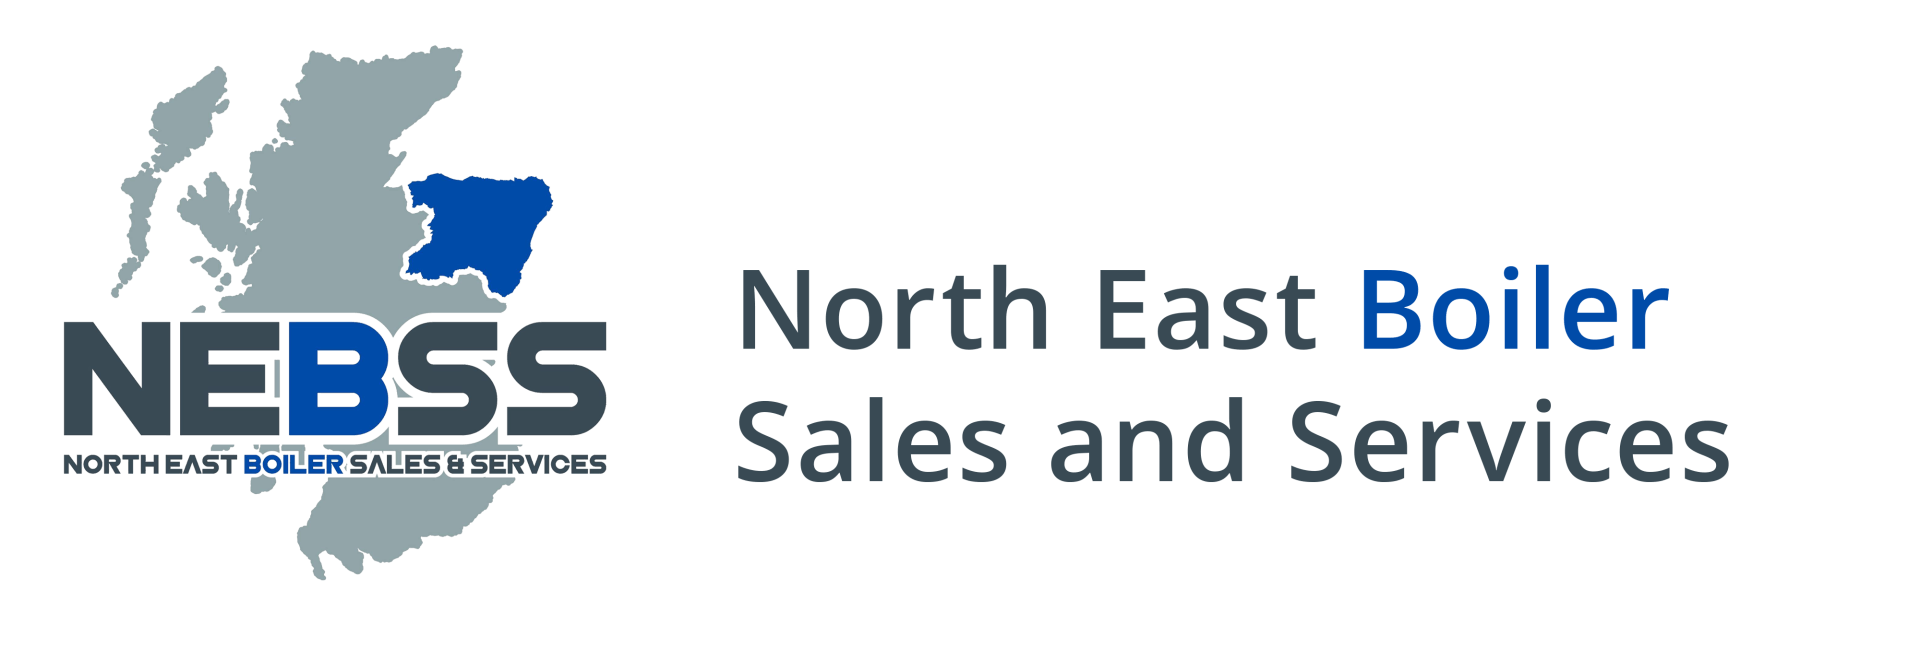 North East Boiler Sales and Services Logo